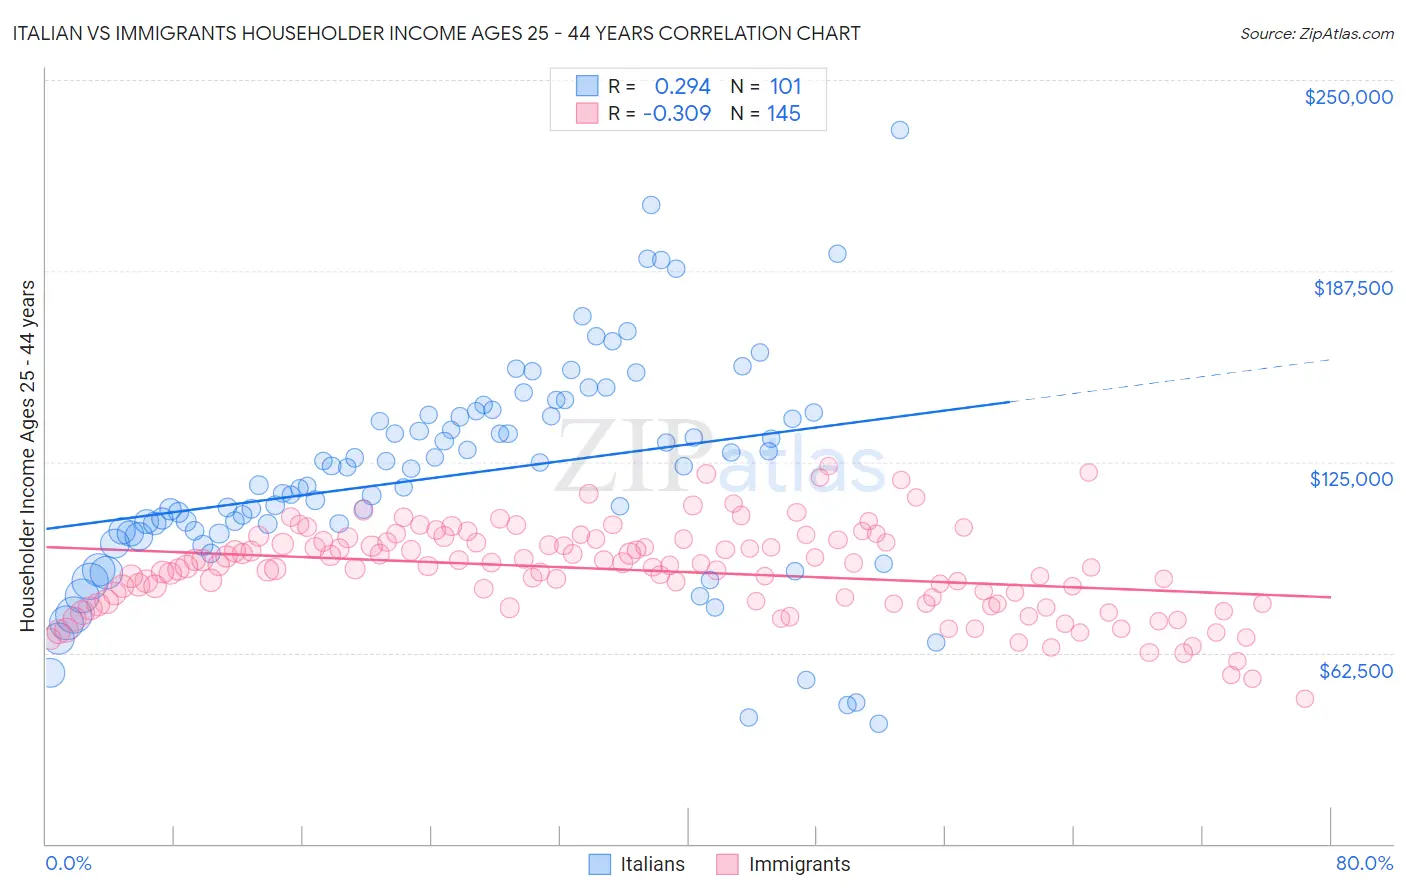 Italian vs Immigrants Householder Income Ages 25 - 44 years